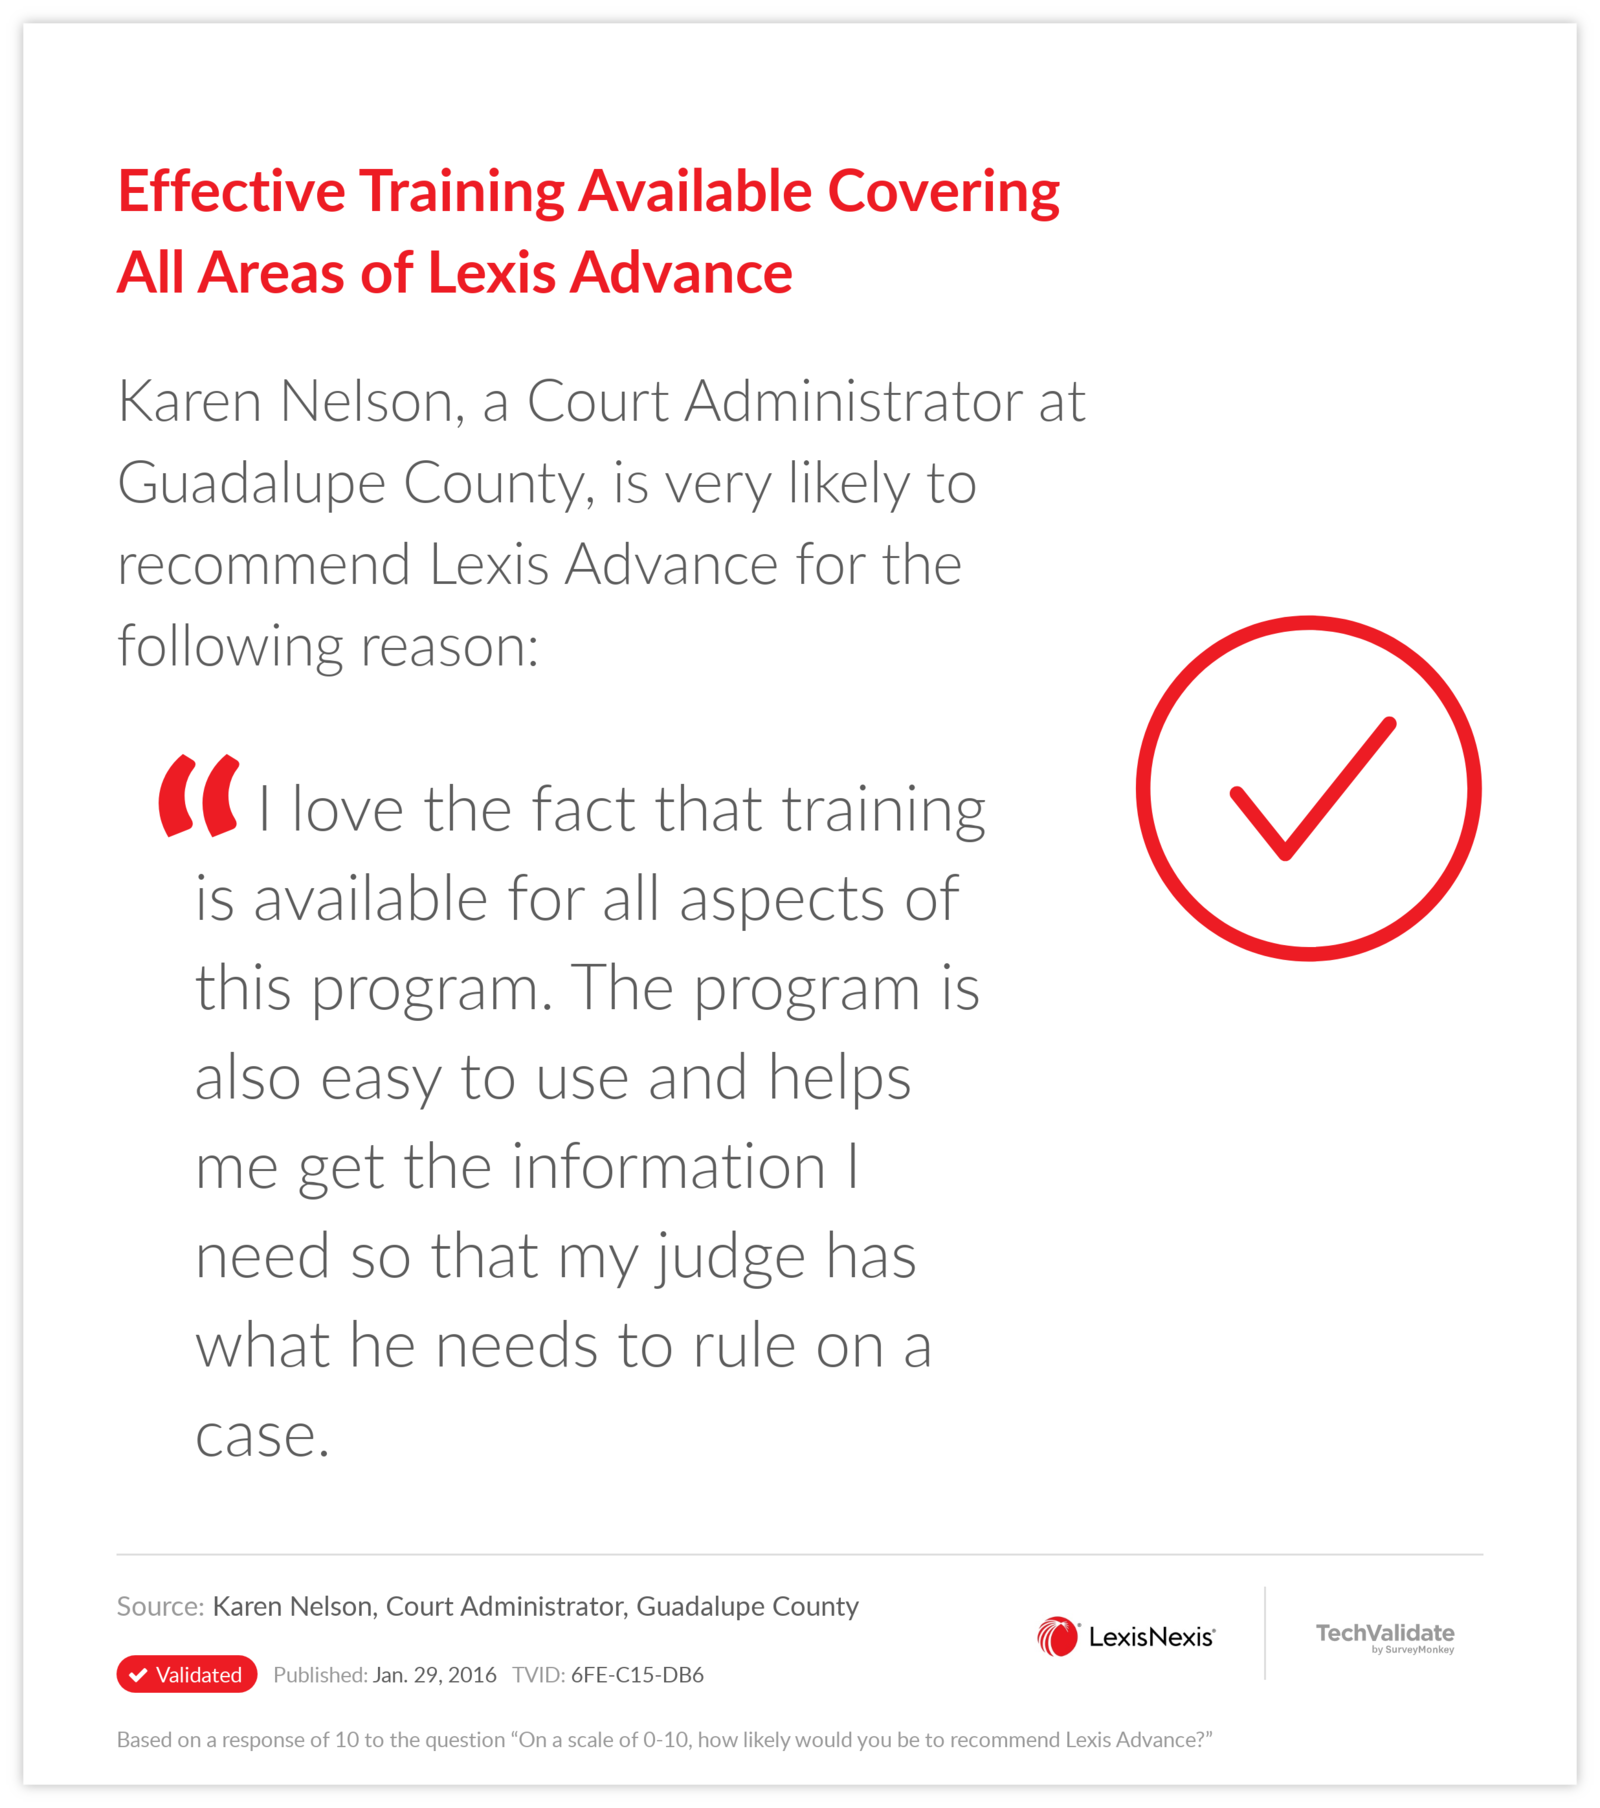 Effective Training Available Covering All Areas of Lexis Advance